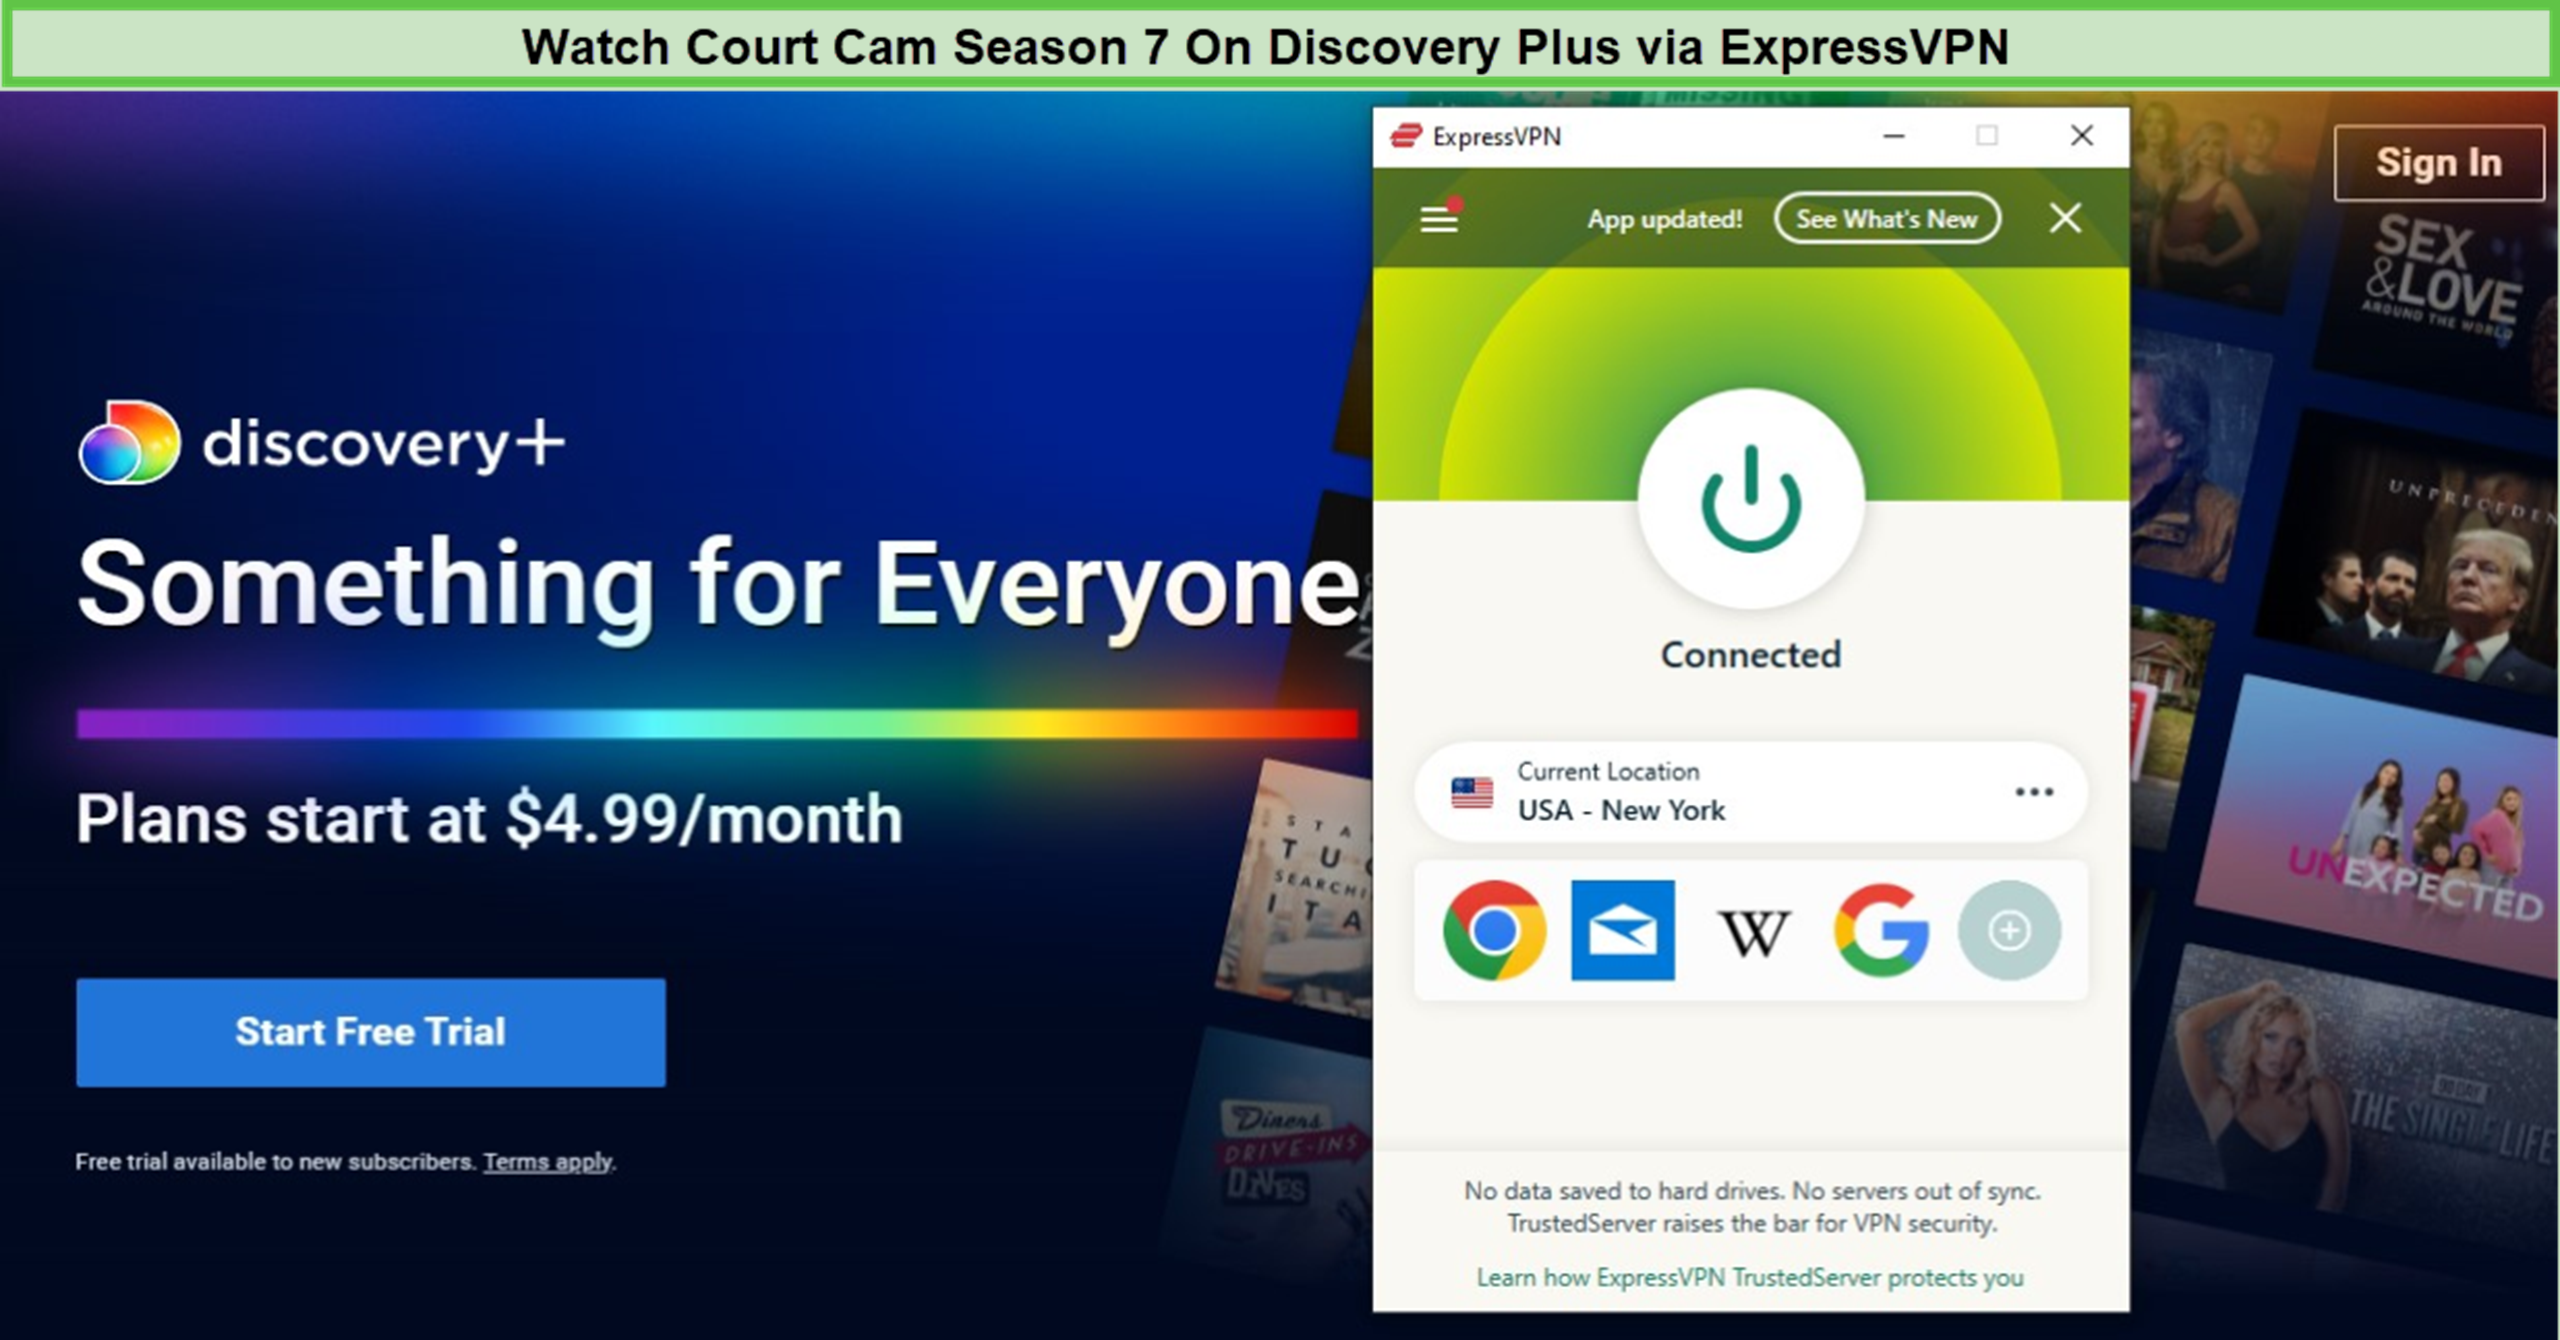 Watch-Court-Cam-Season-7-in-UAE-on-Discovery-Plus-With-ExpressVPN